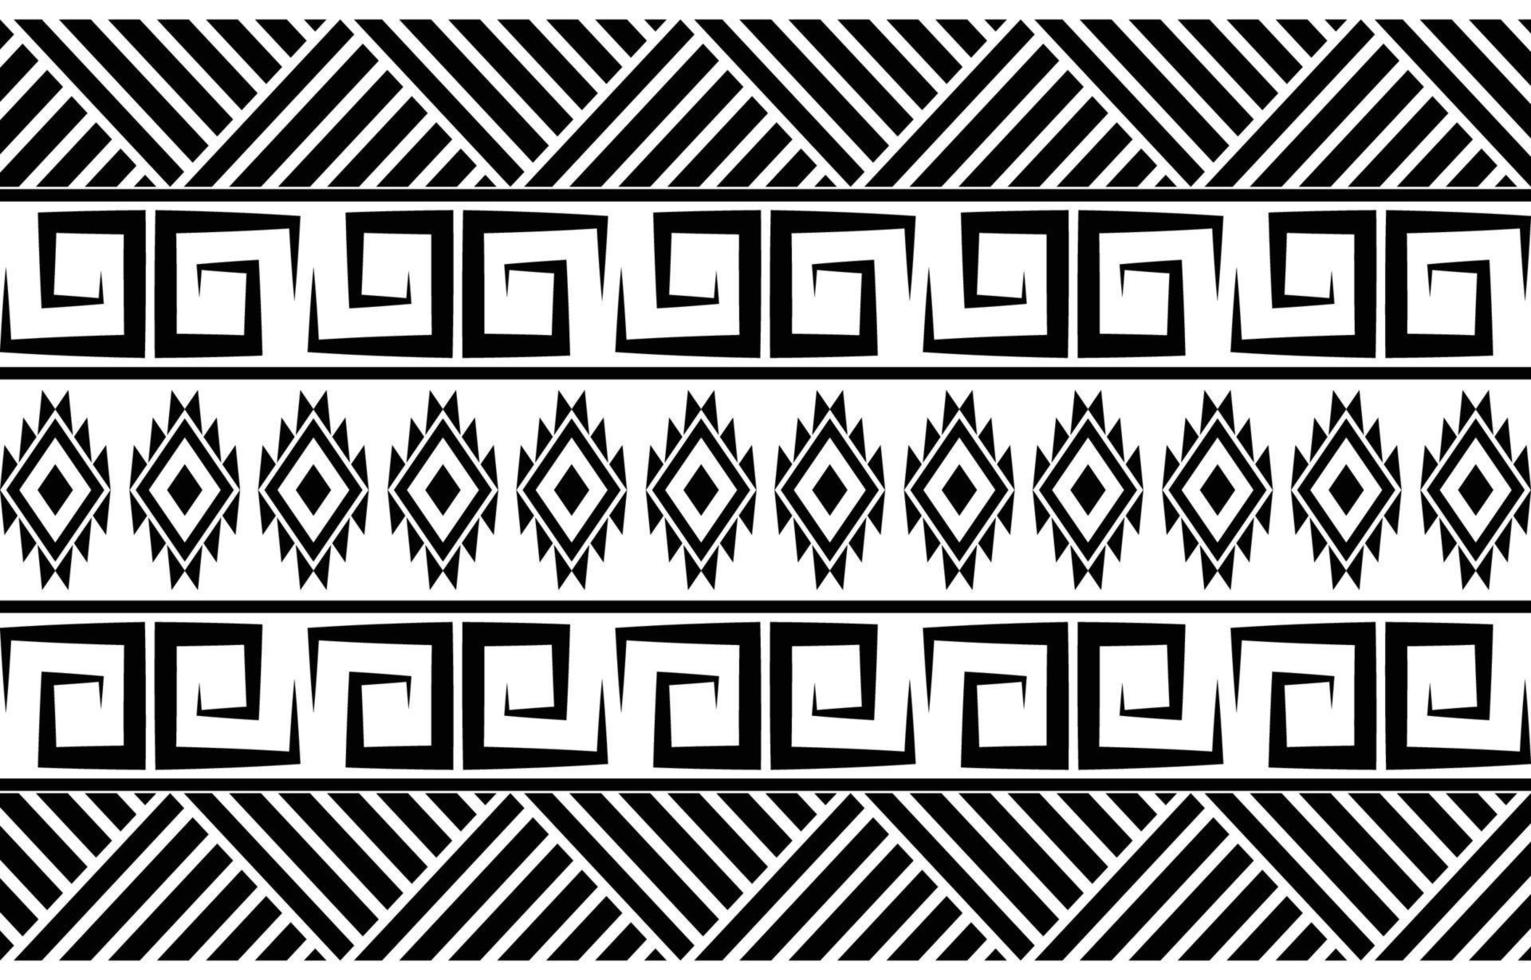 Tribal Black and white Abstract ethnic geometric pattern design for background or wallpaper.vector illustration To print fabric patterns, rugs, shirts, costumes, turban, hats, curtains. vector